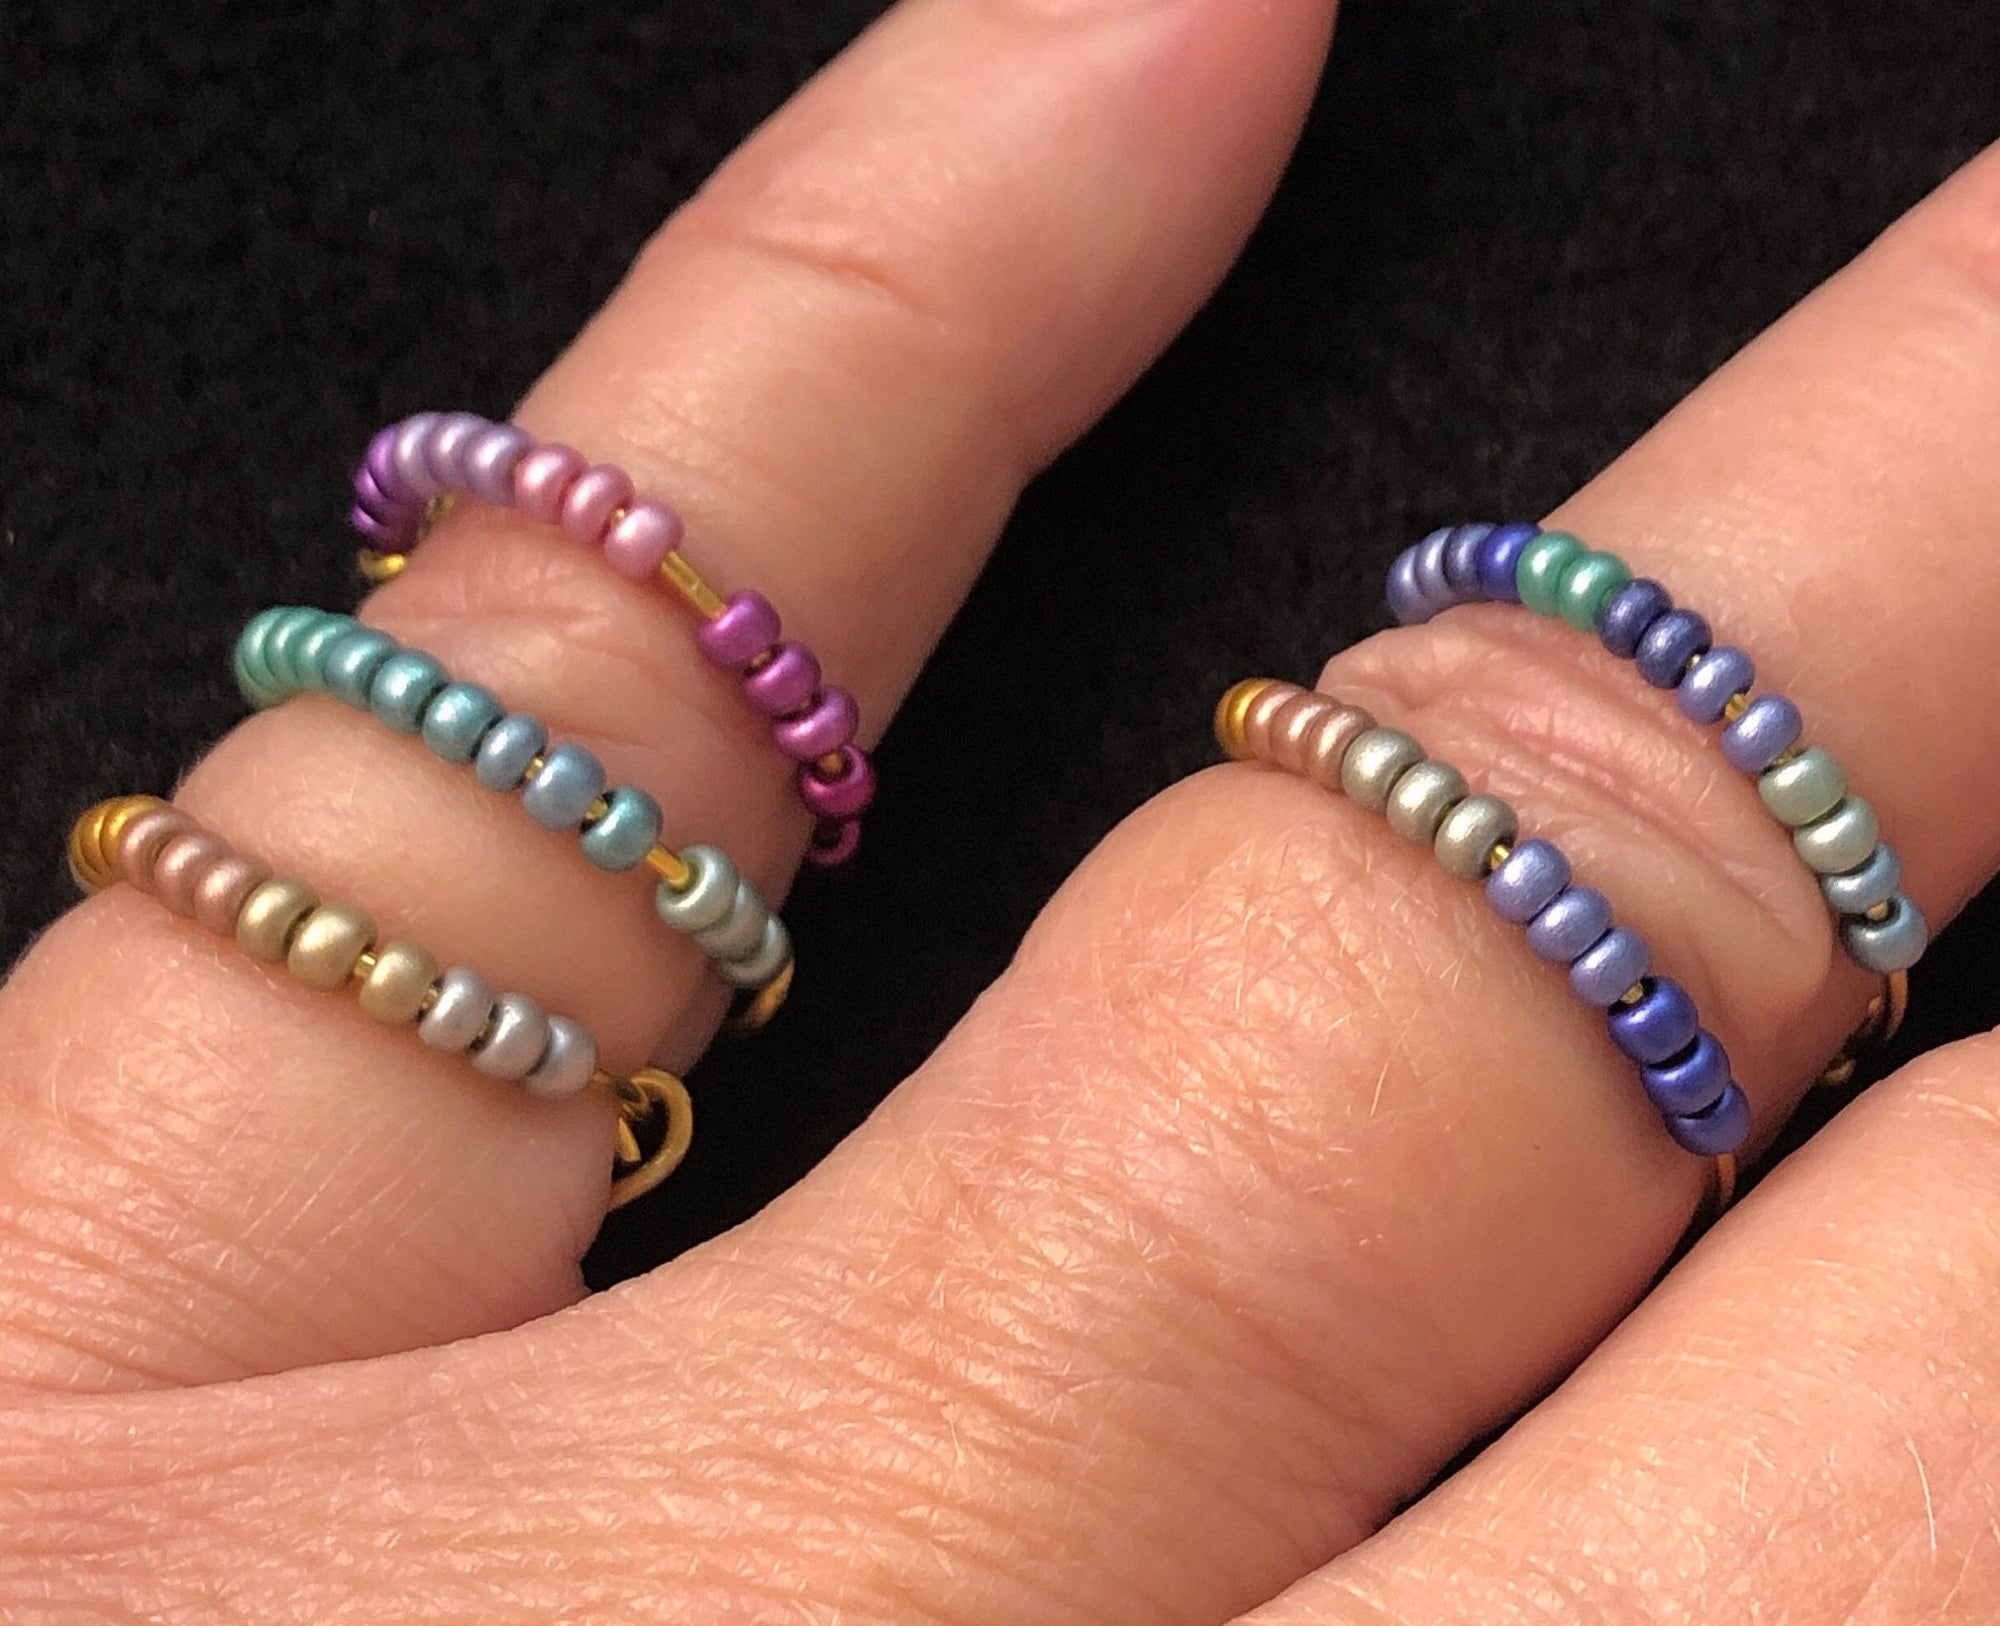 Set of two Dainty ring stack beaded rings  - Choose your colors